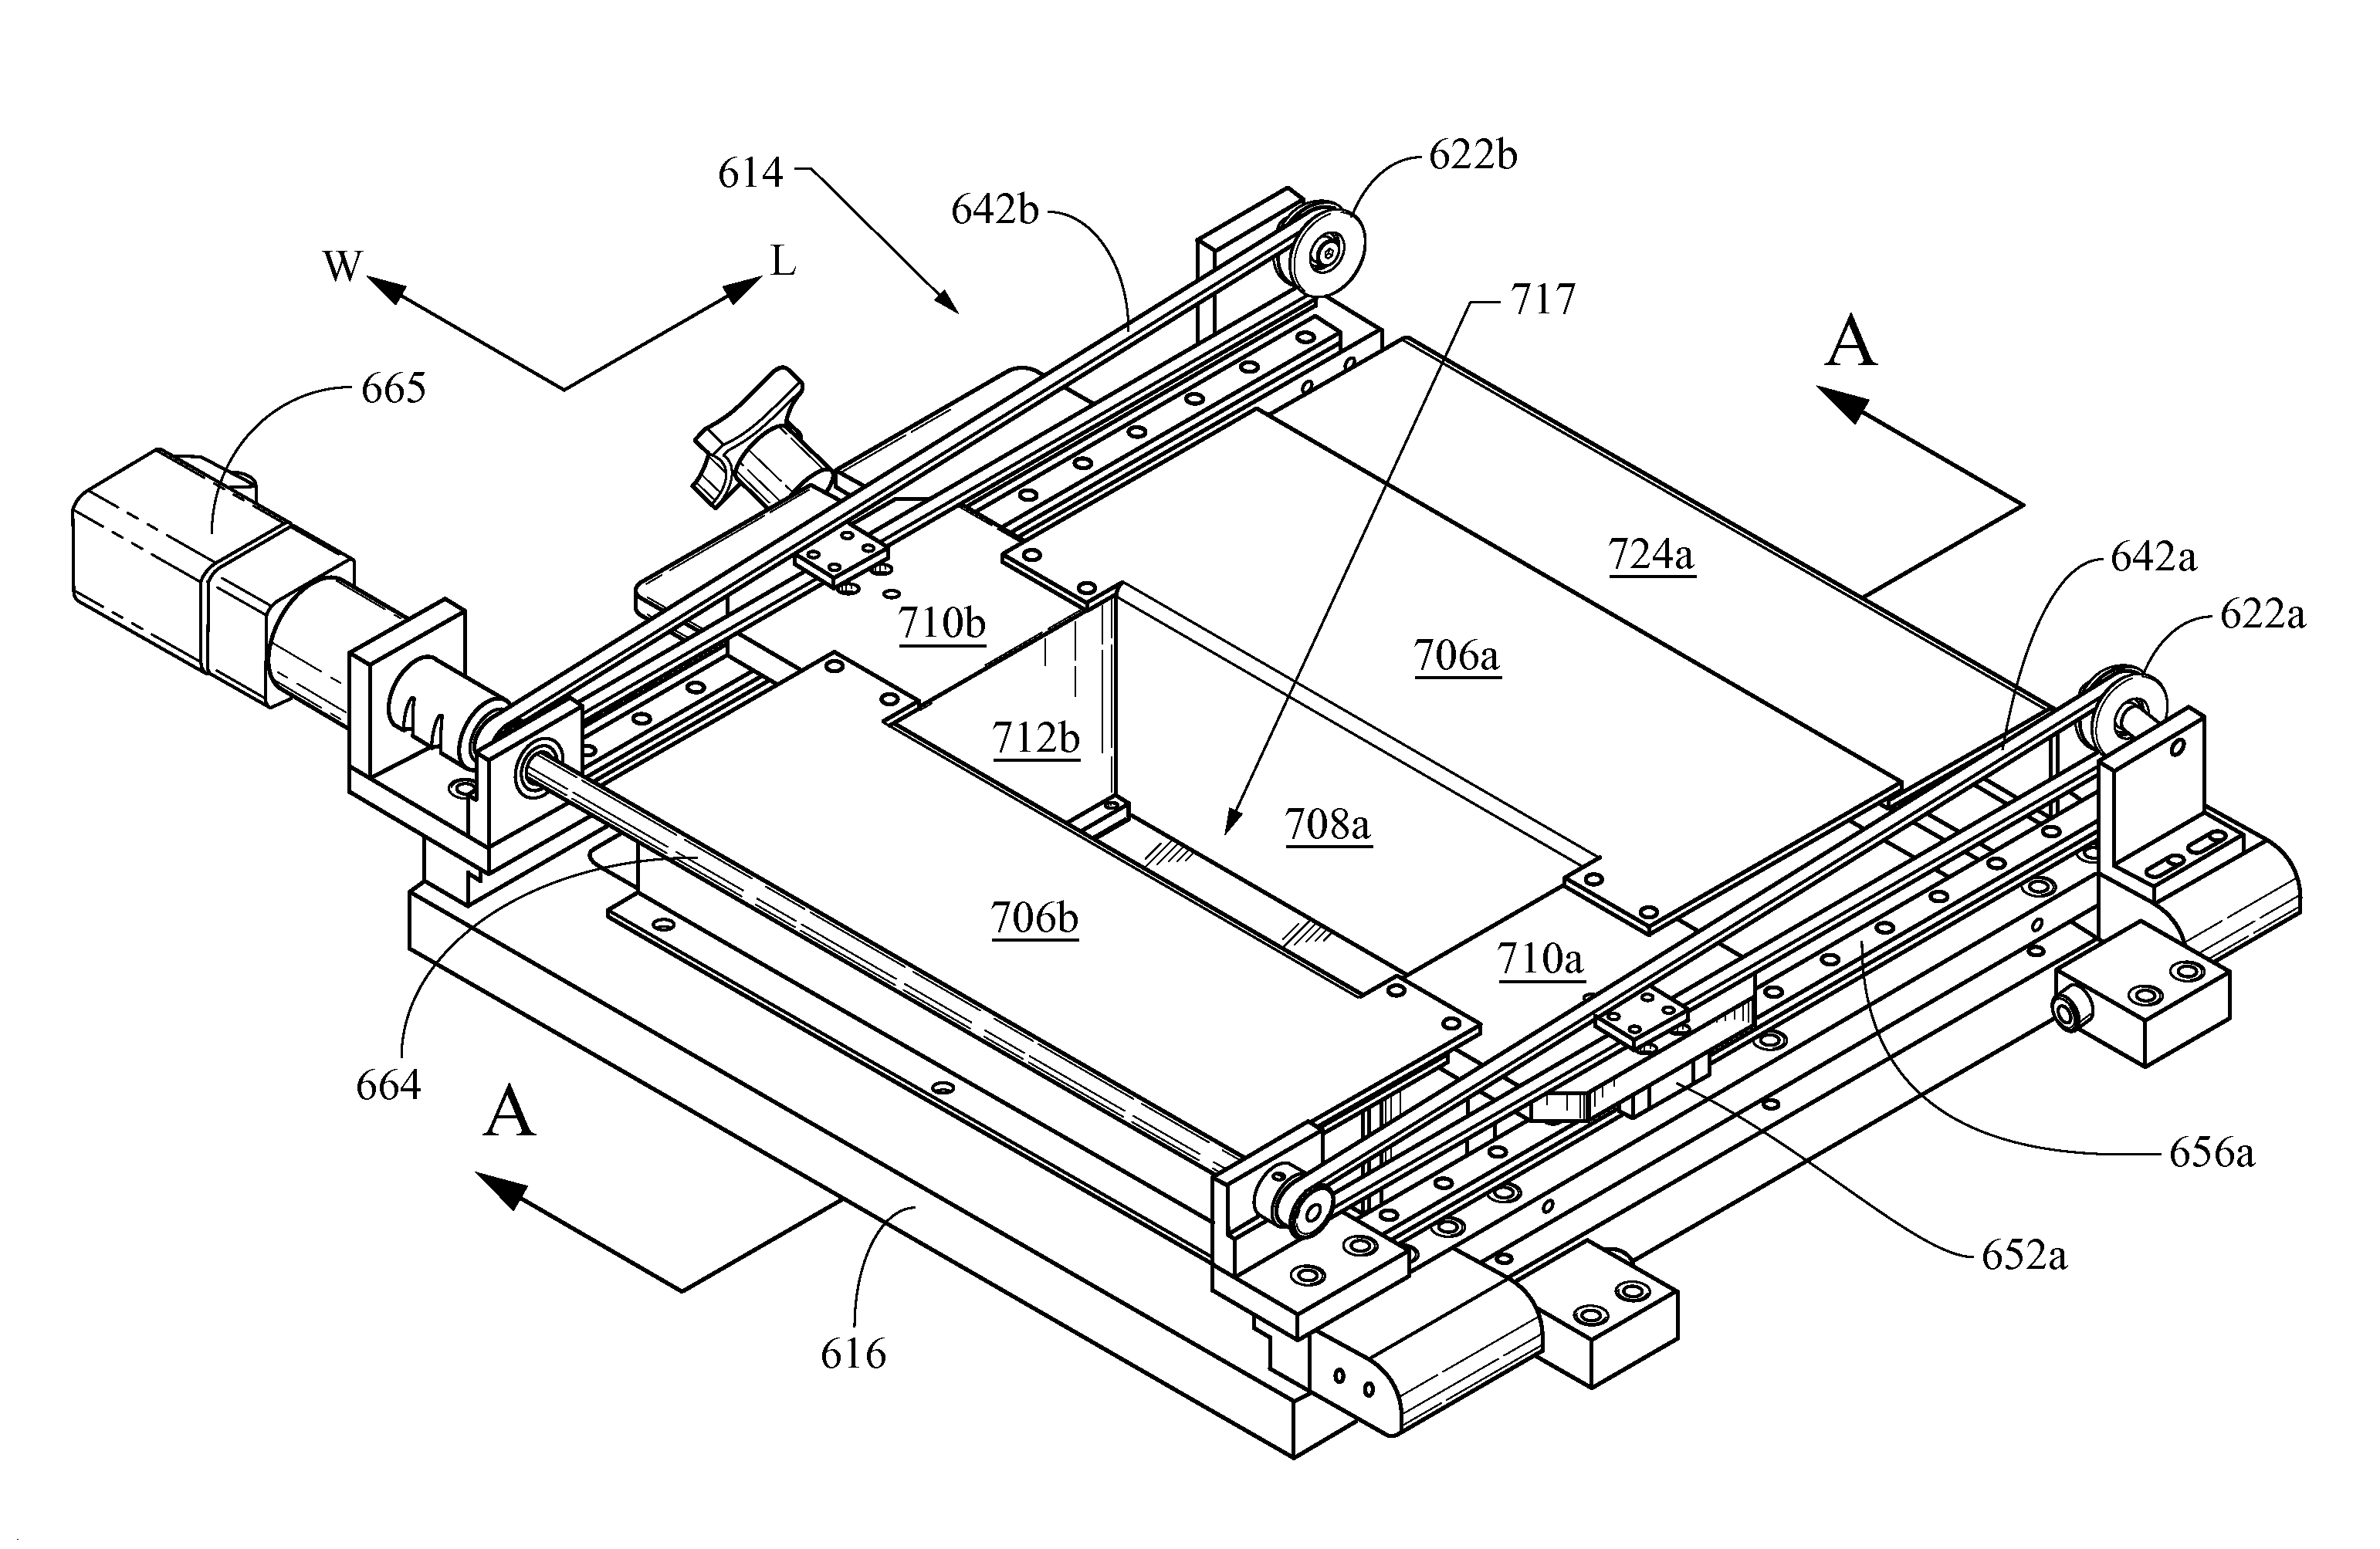 Resin solidification substrate and assembly